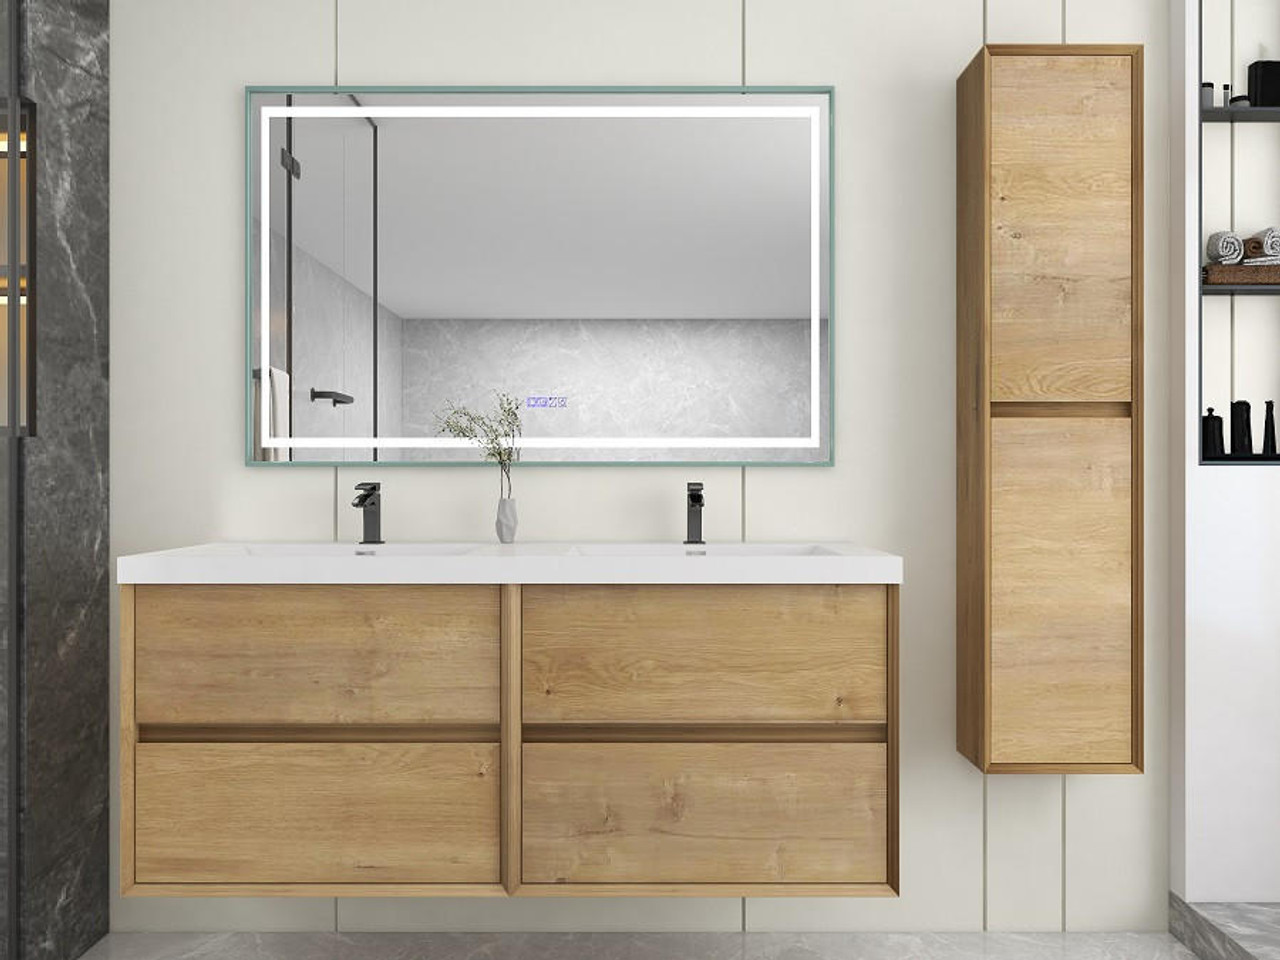 https://cdn11.bigcommerce.com/s-qgdlnuy6t7/images/stencil/1280x1280/products/1322/14903/kingdee-kingdee-60-wall-mounted-double-sink-vanity-with-acrylic-top-60dd__29228.1692060659.jpg?c=2